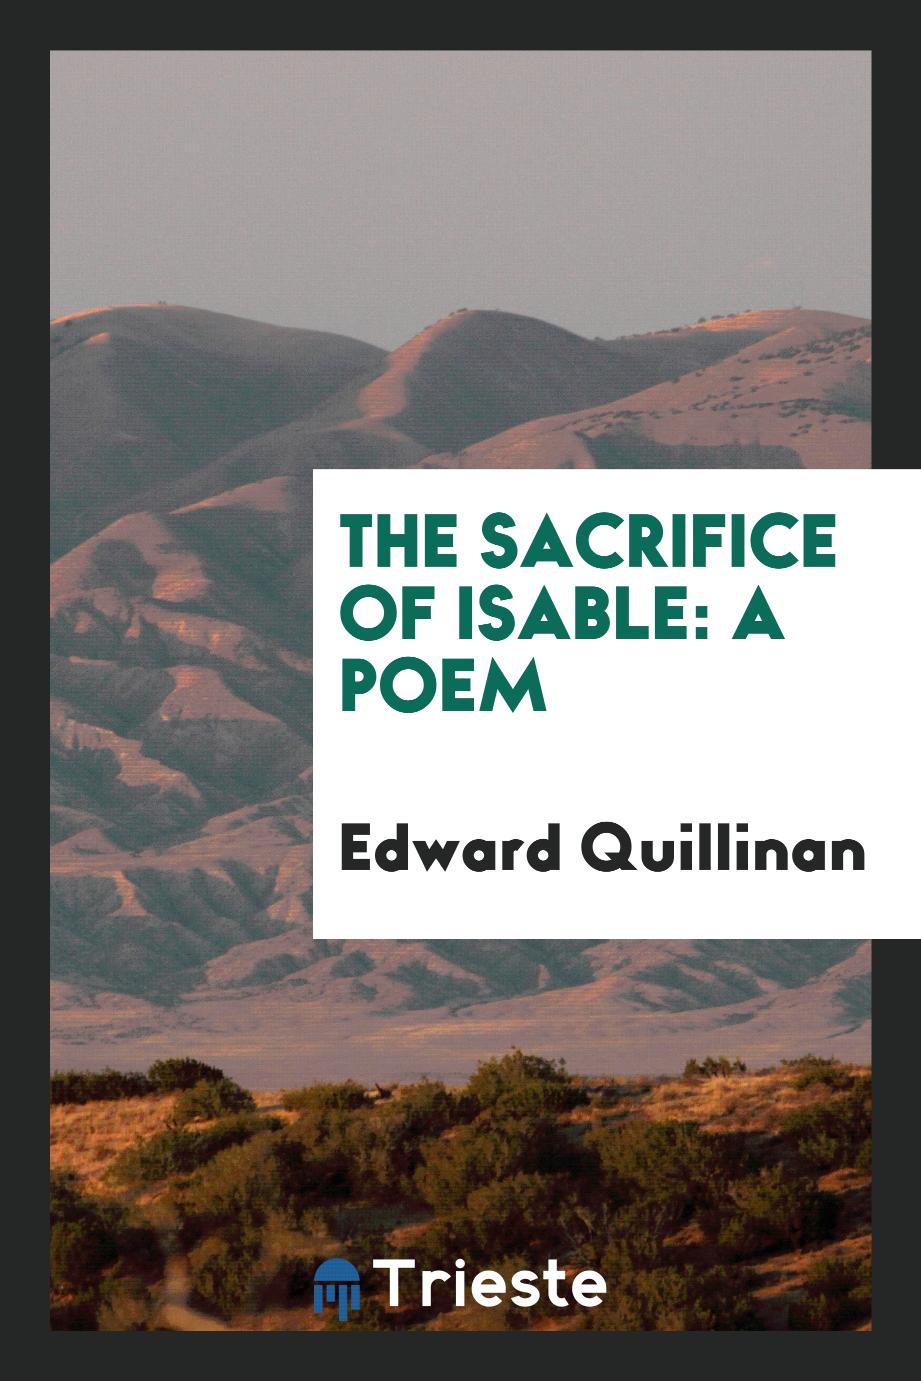 The sacrifice of Isable: A poem